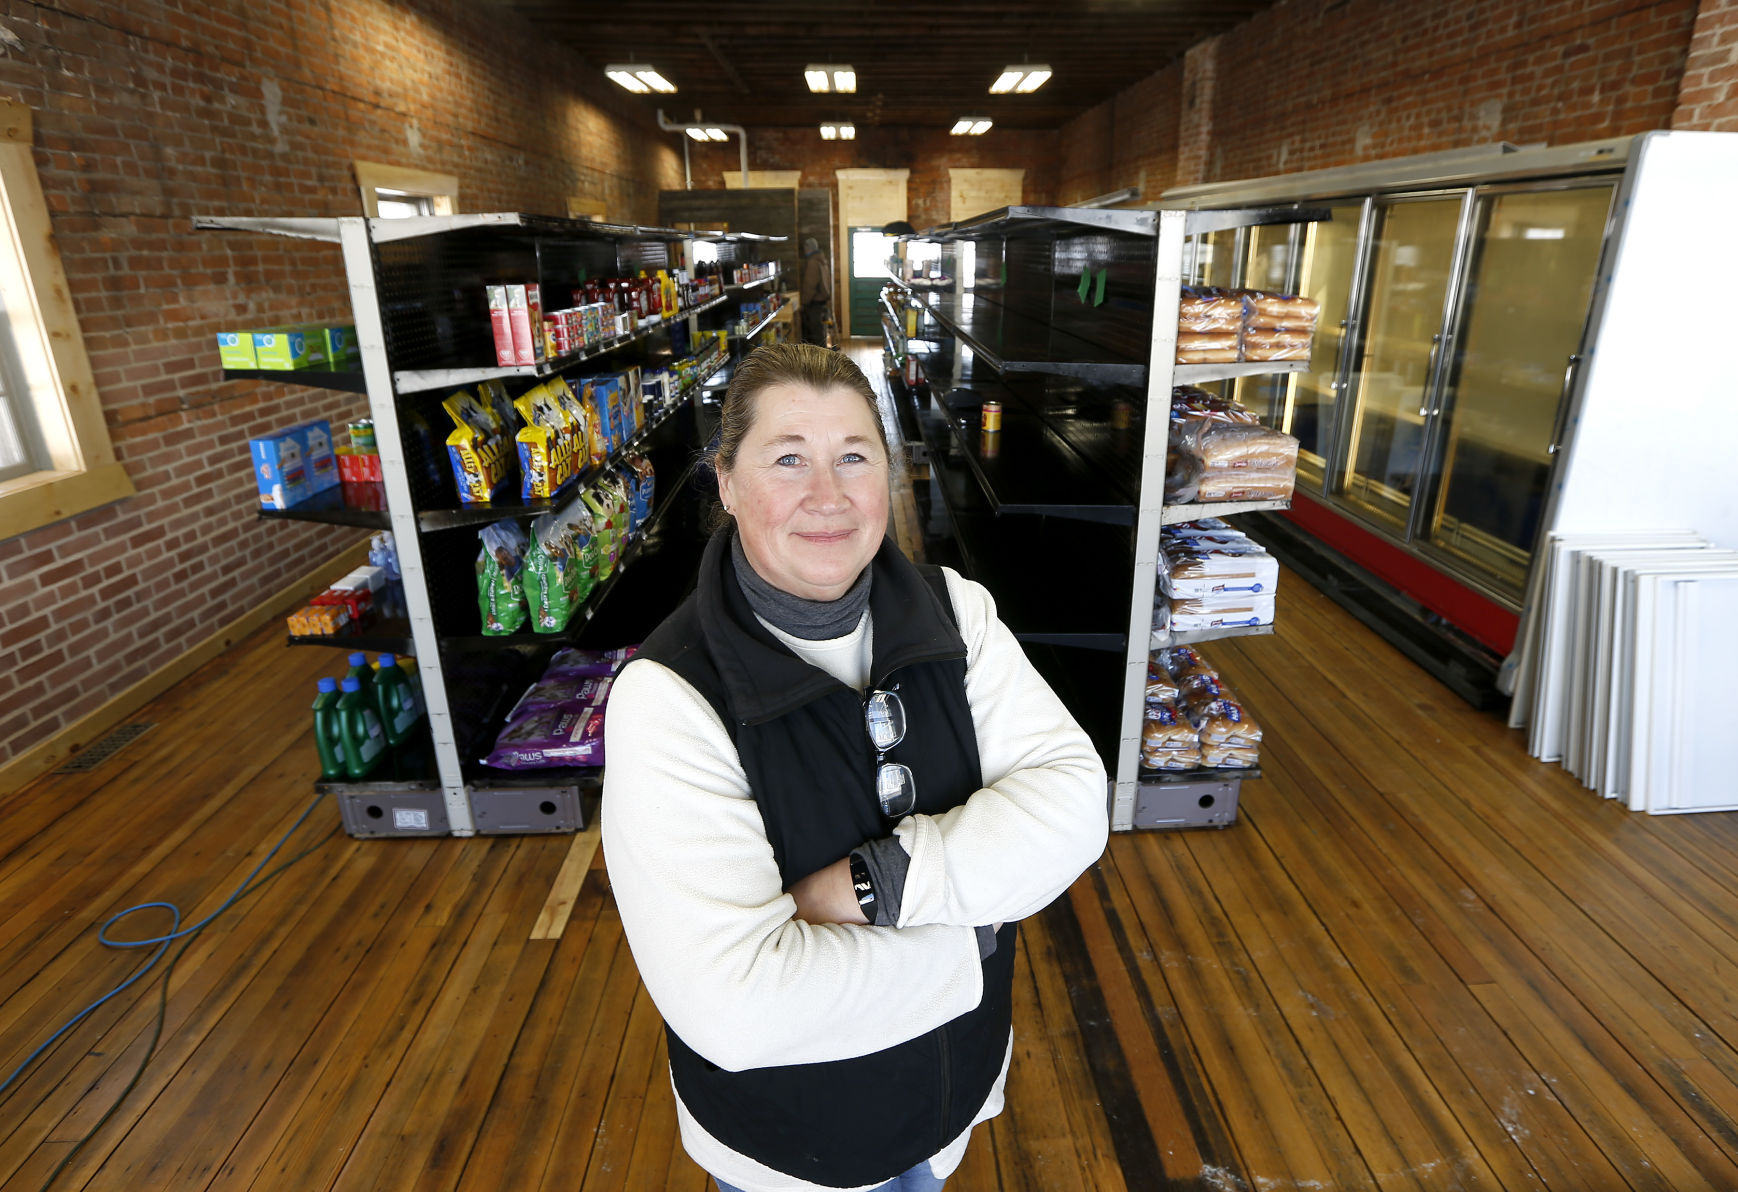 Debbie Boden is store manager of Great River Market, which opened for businesss Saturday in Hanover, Ill. PHOTO CREDIT: Dave Kettering